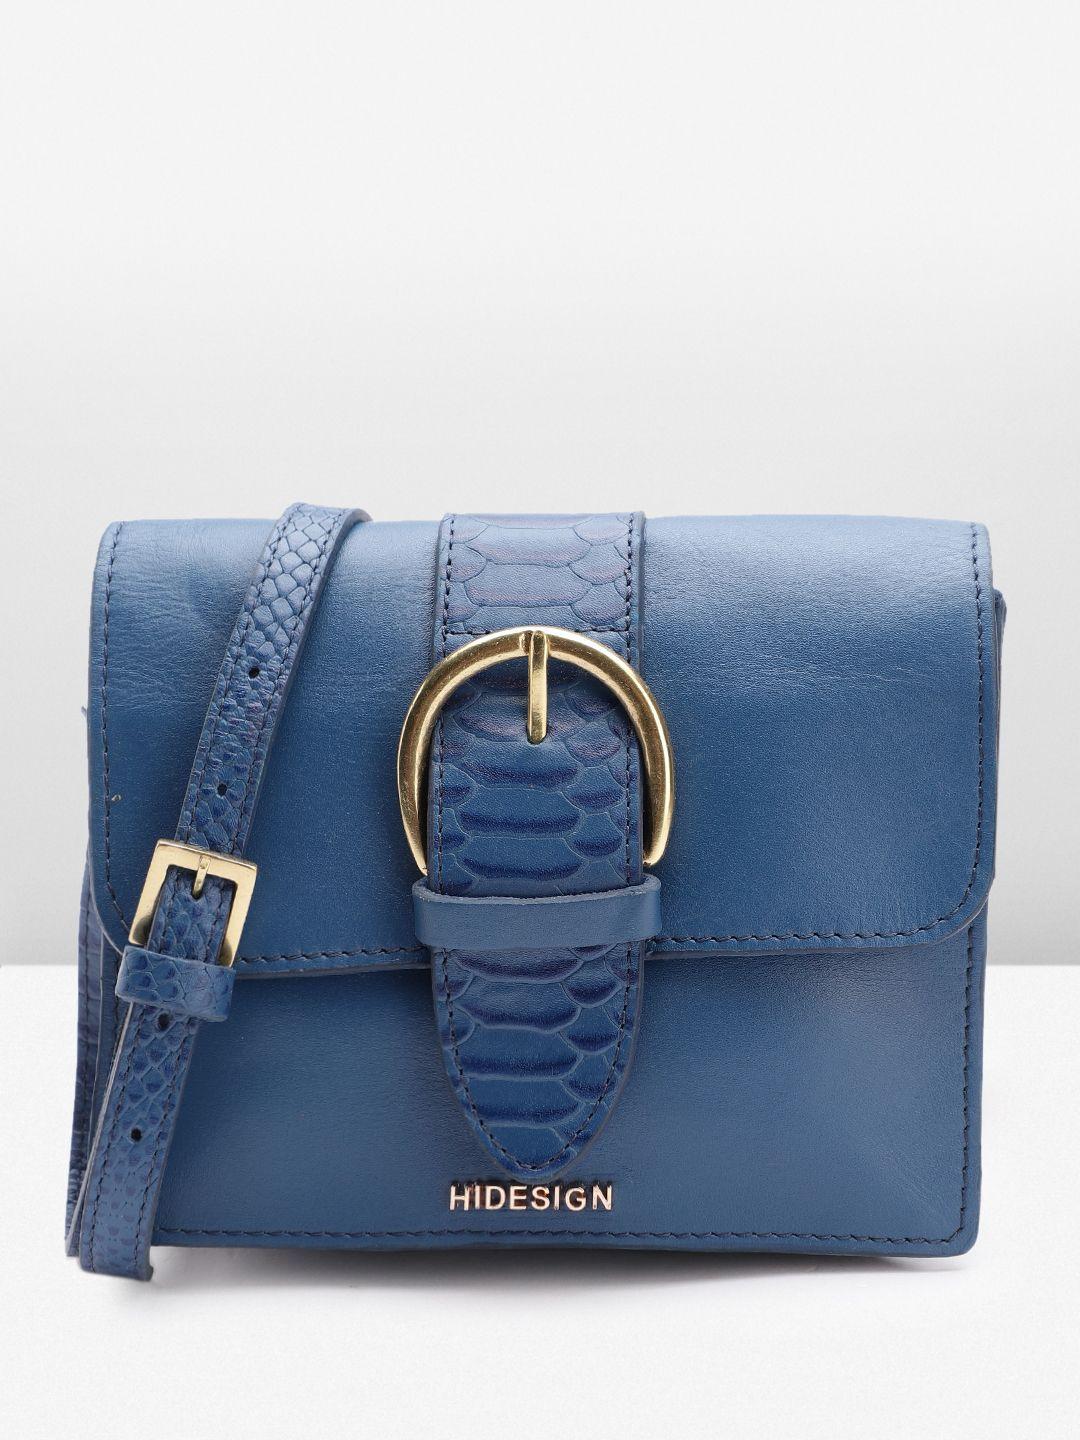 hidesign leather structured sling bag with buckle detail